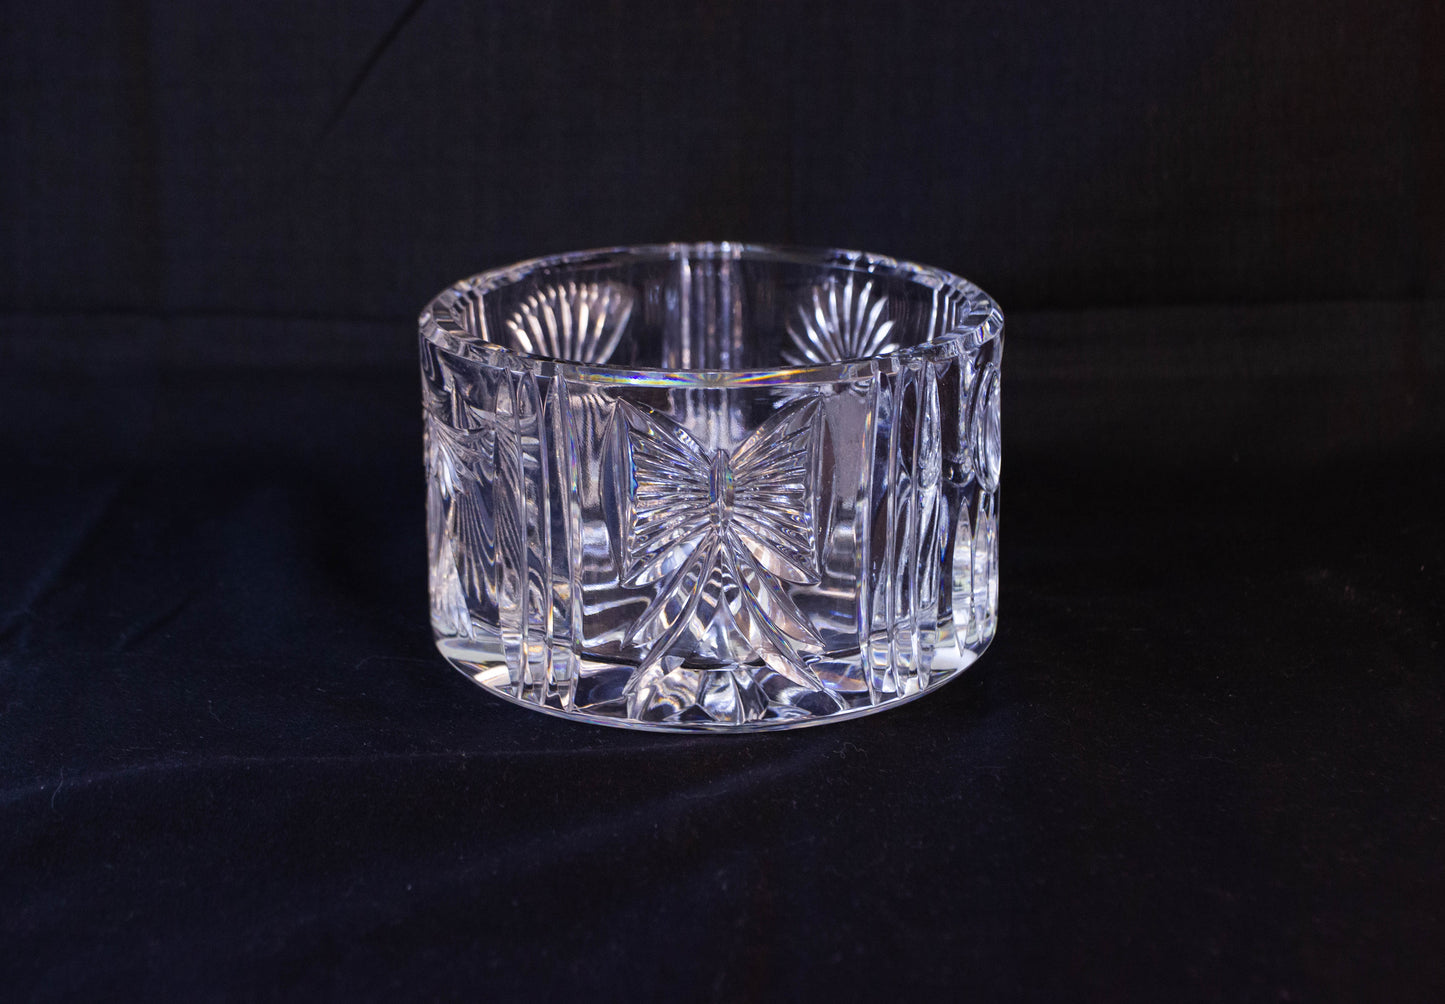 Waterford Crystal Bottle Coaster